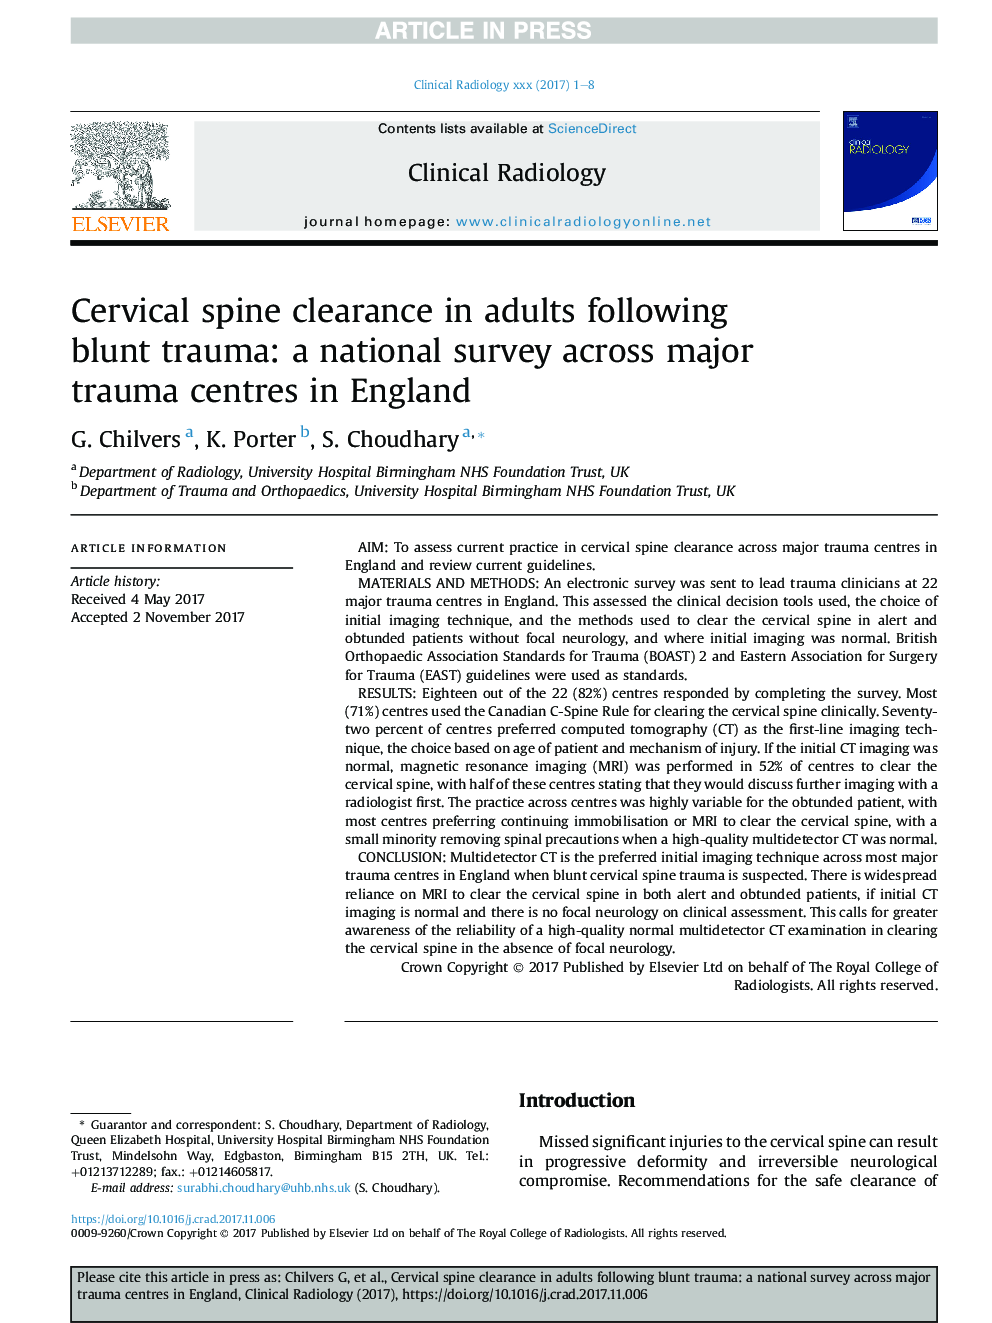 Cervical spine clearance in adults following blunt trauma: a national survey across major trauma centres in England